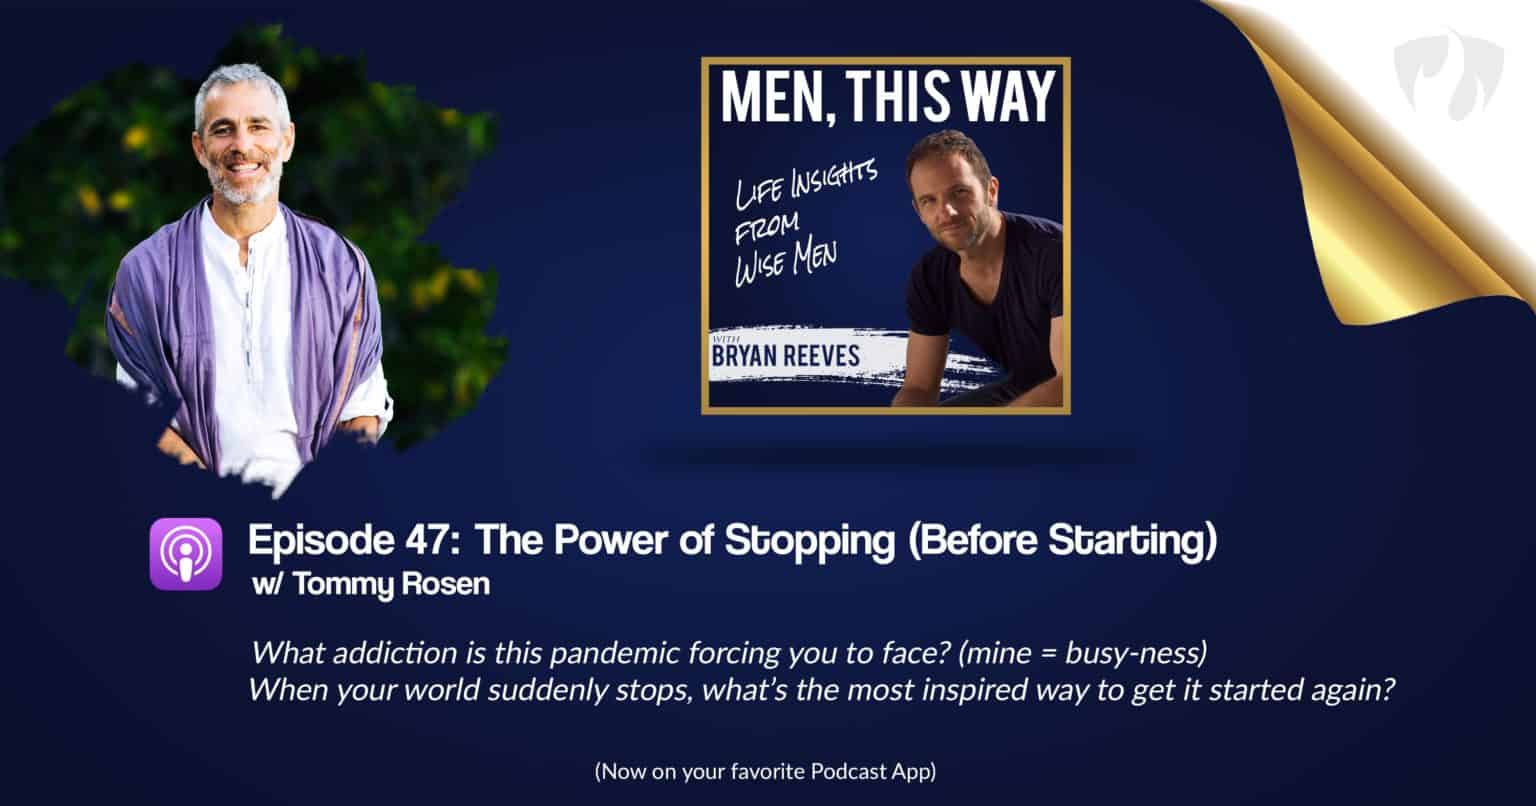 The Power of Stopping (Before Starting) w/ Tommy Rosen (047) Bryan Reeves